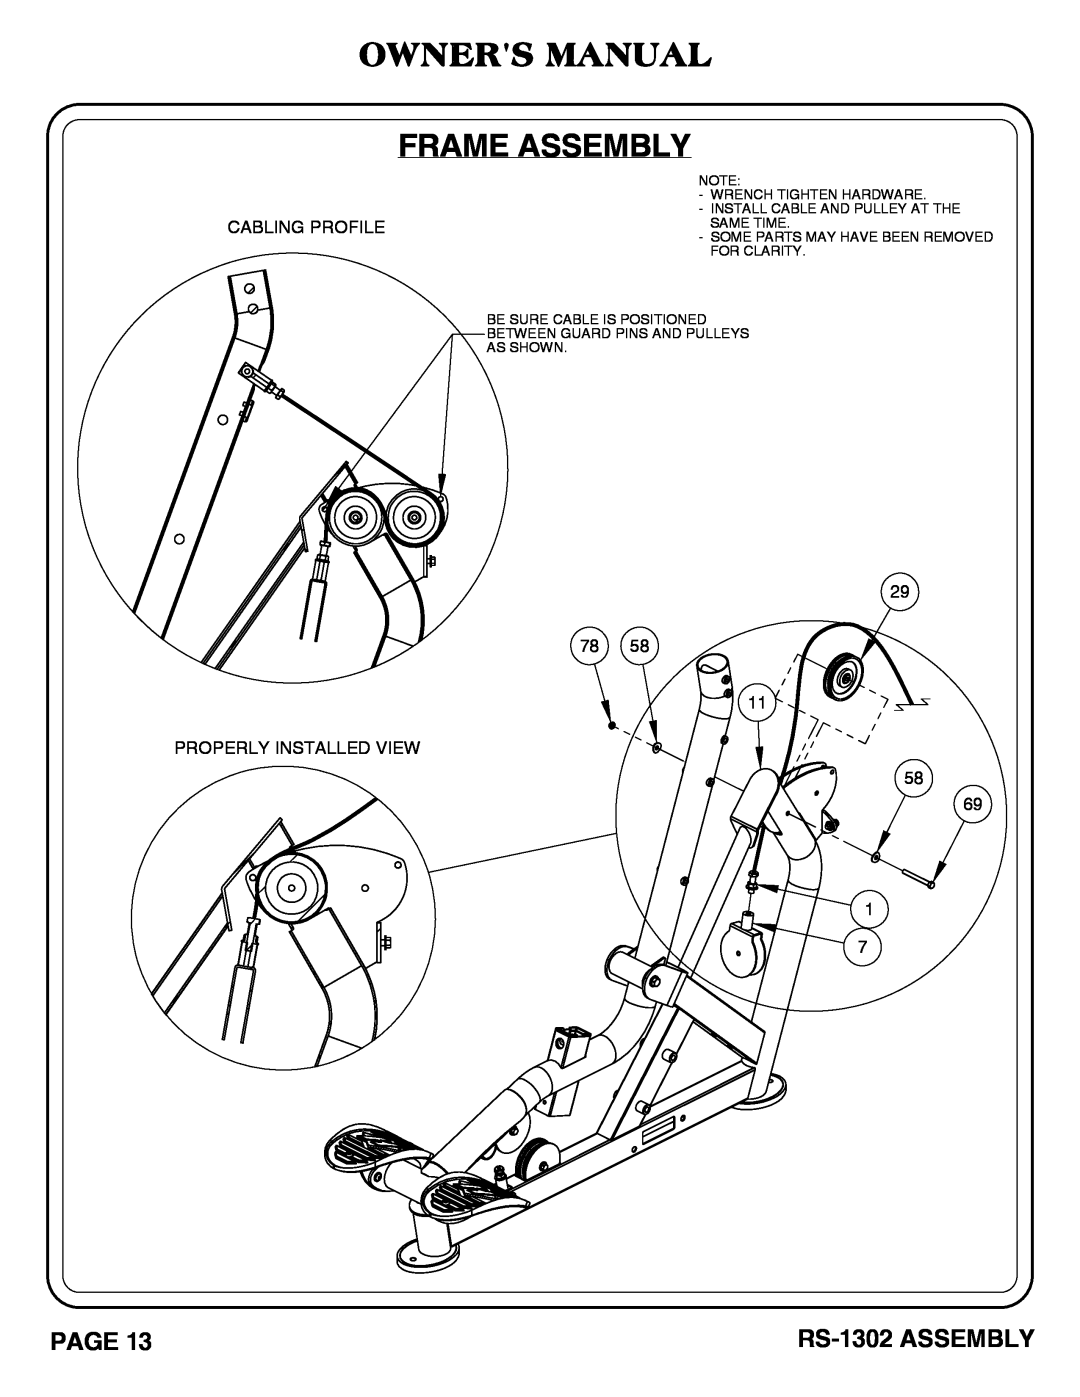 Hoist Fitness owner manual Owners Manual Frame Assembly, RS-1302 ASSEMBLY, Some Parts May Have Been Removed For Clarity 